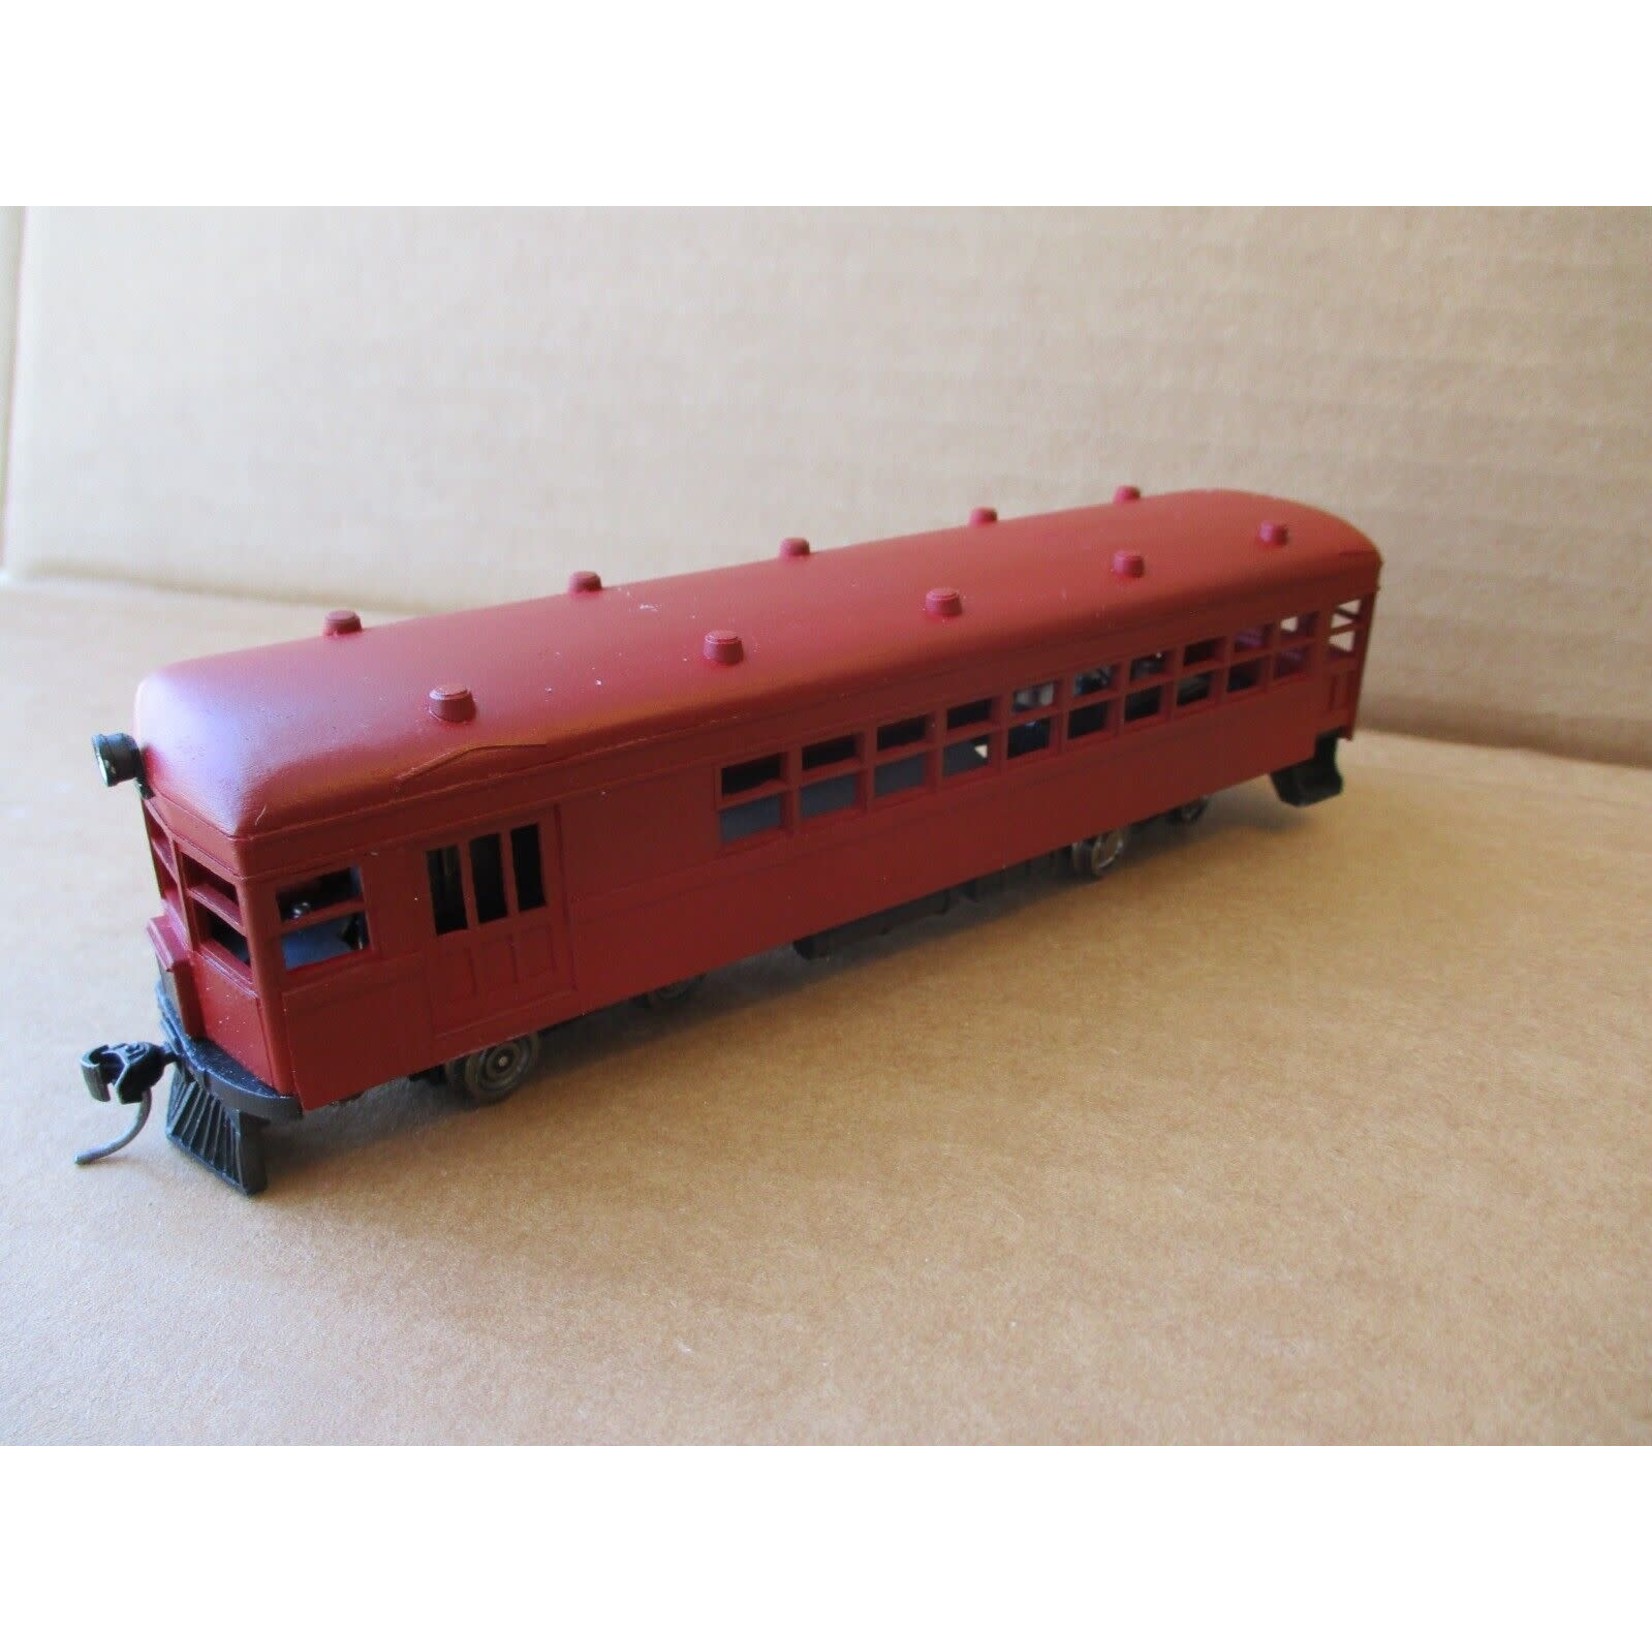 Railway Recollections HO Brill Model 55 Cast Resin Conversion Kit (un-powered shell only)